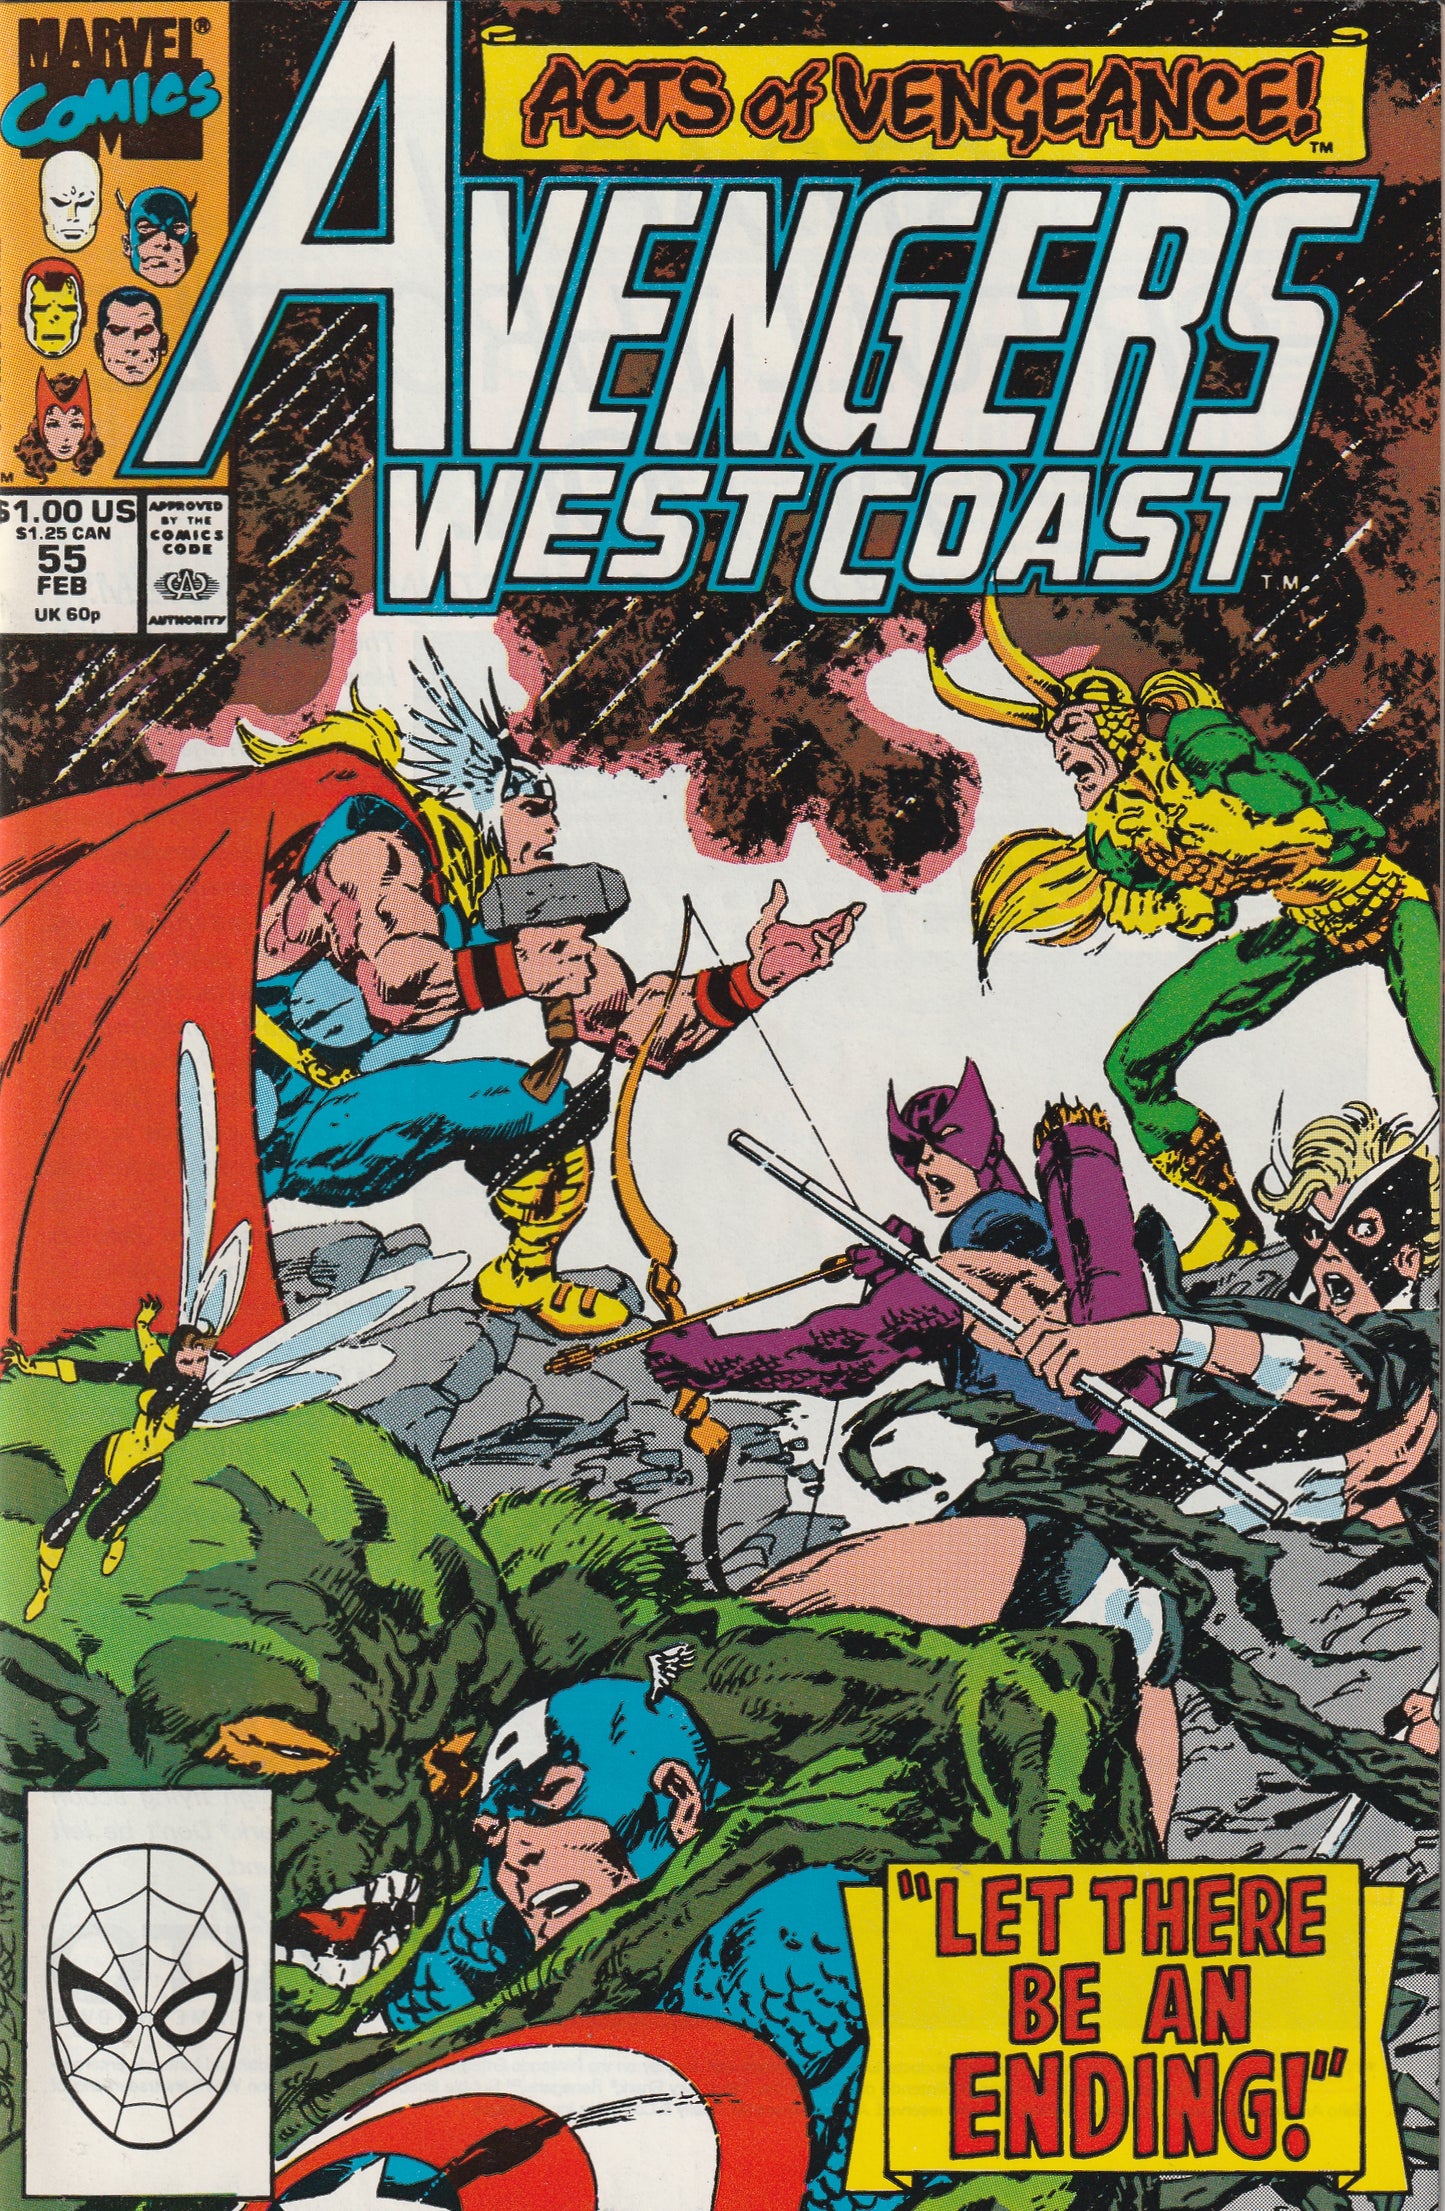 Avengers West Coast #55 (1990) - Conclusion to the Acts of Vengeance event.